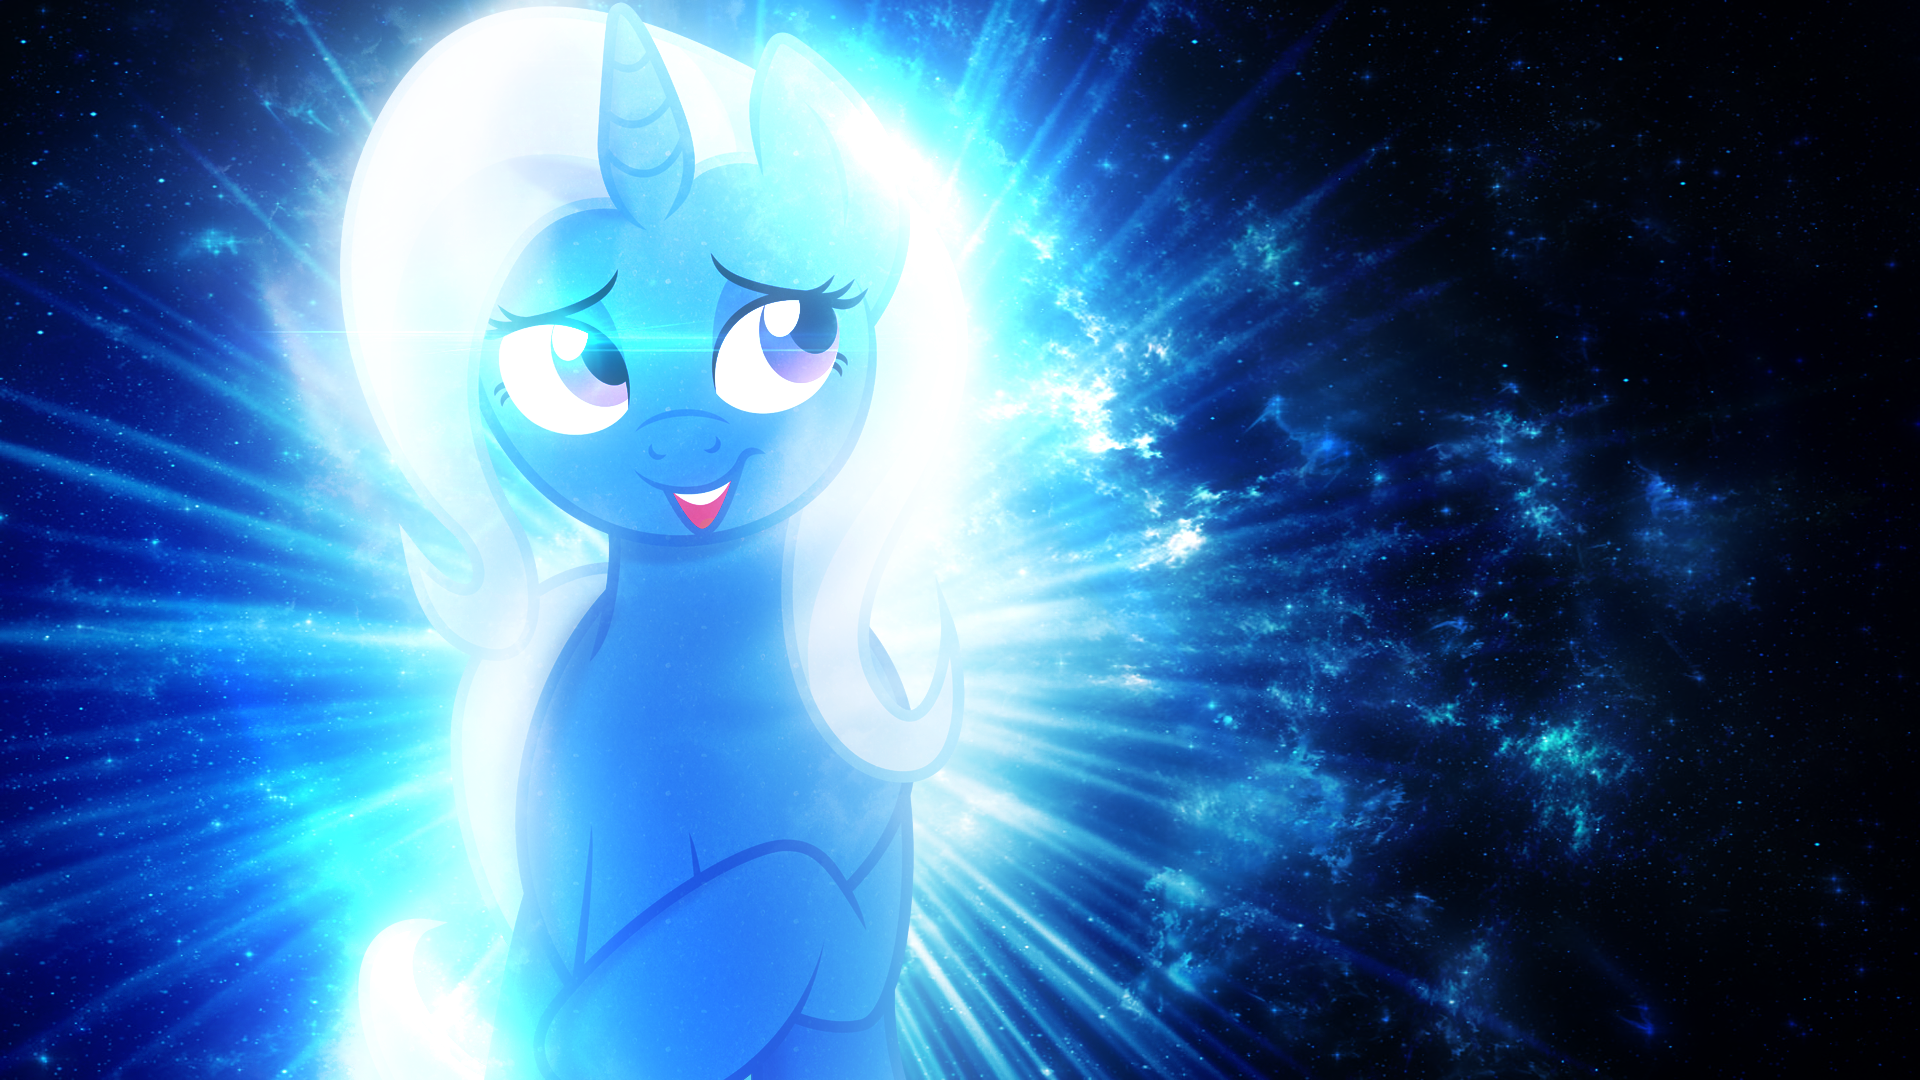 Great and Casual Trixie - Wallpaper by Joey-Darkmeat, MyLittlePinkieDash and Tzolkine